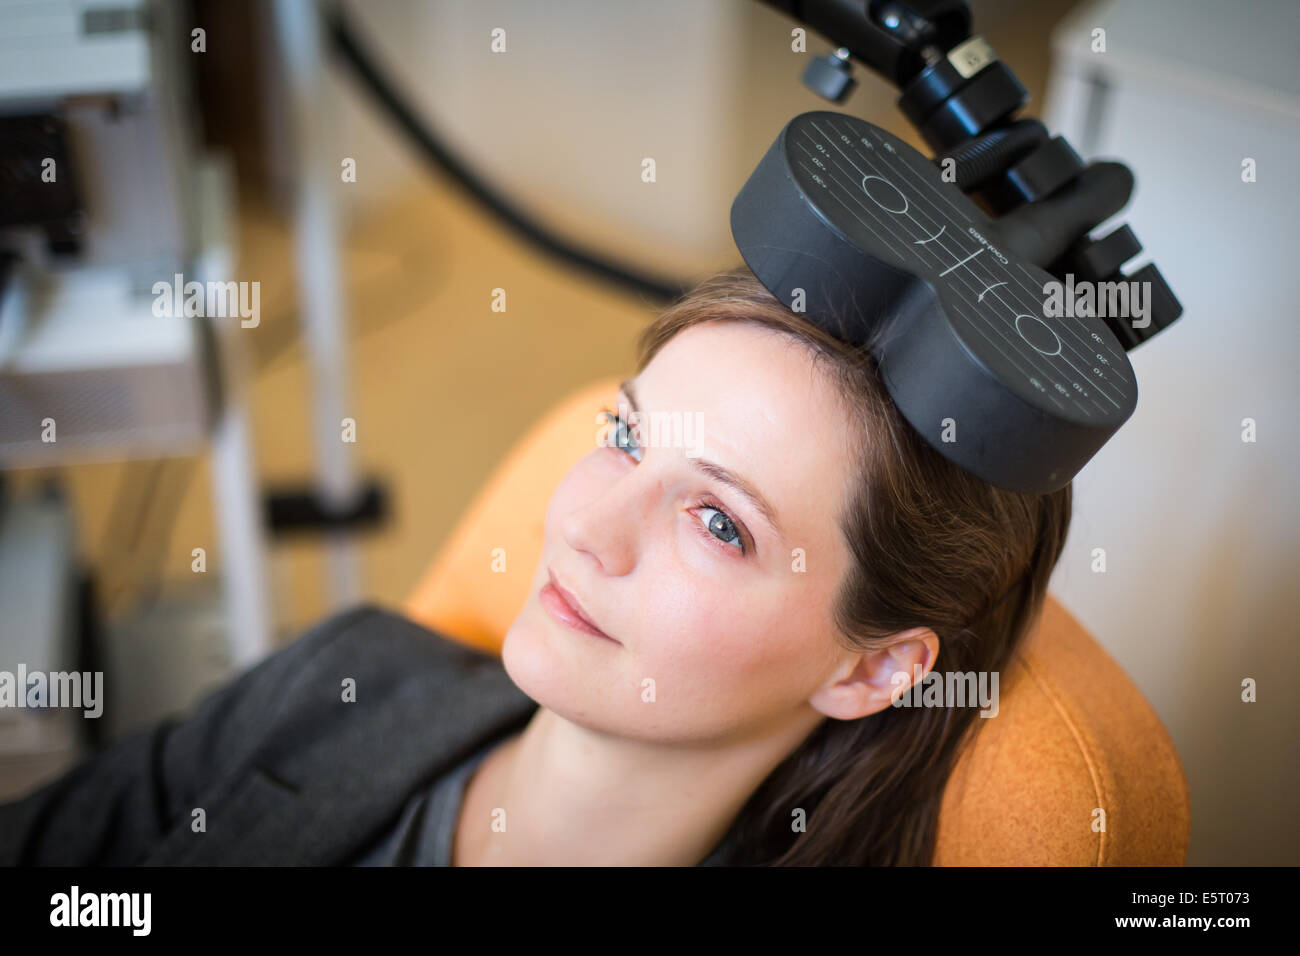 Transcranial magnetic stimulation (TMS), Department of Psychiatry, Pitie-Salpetriere hospital, France. Stock Photo